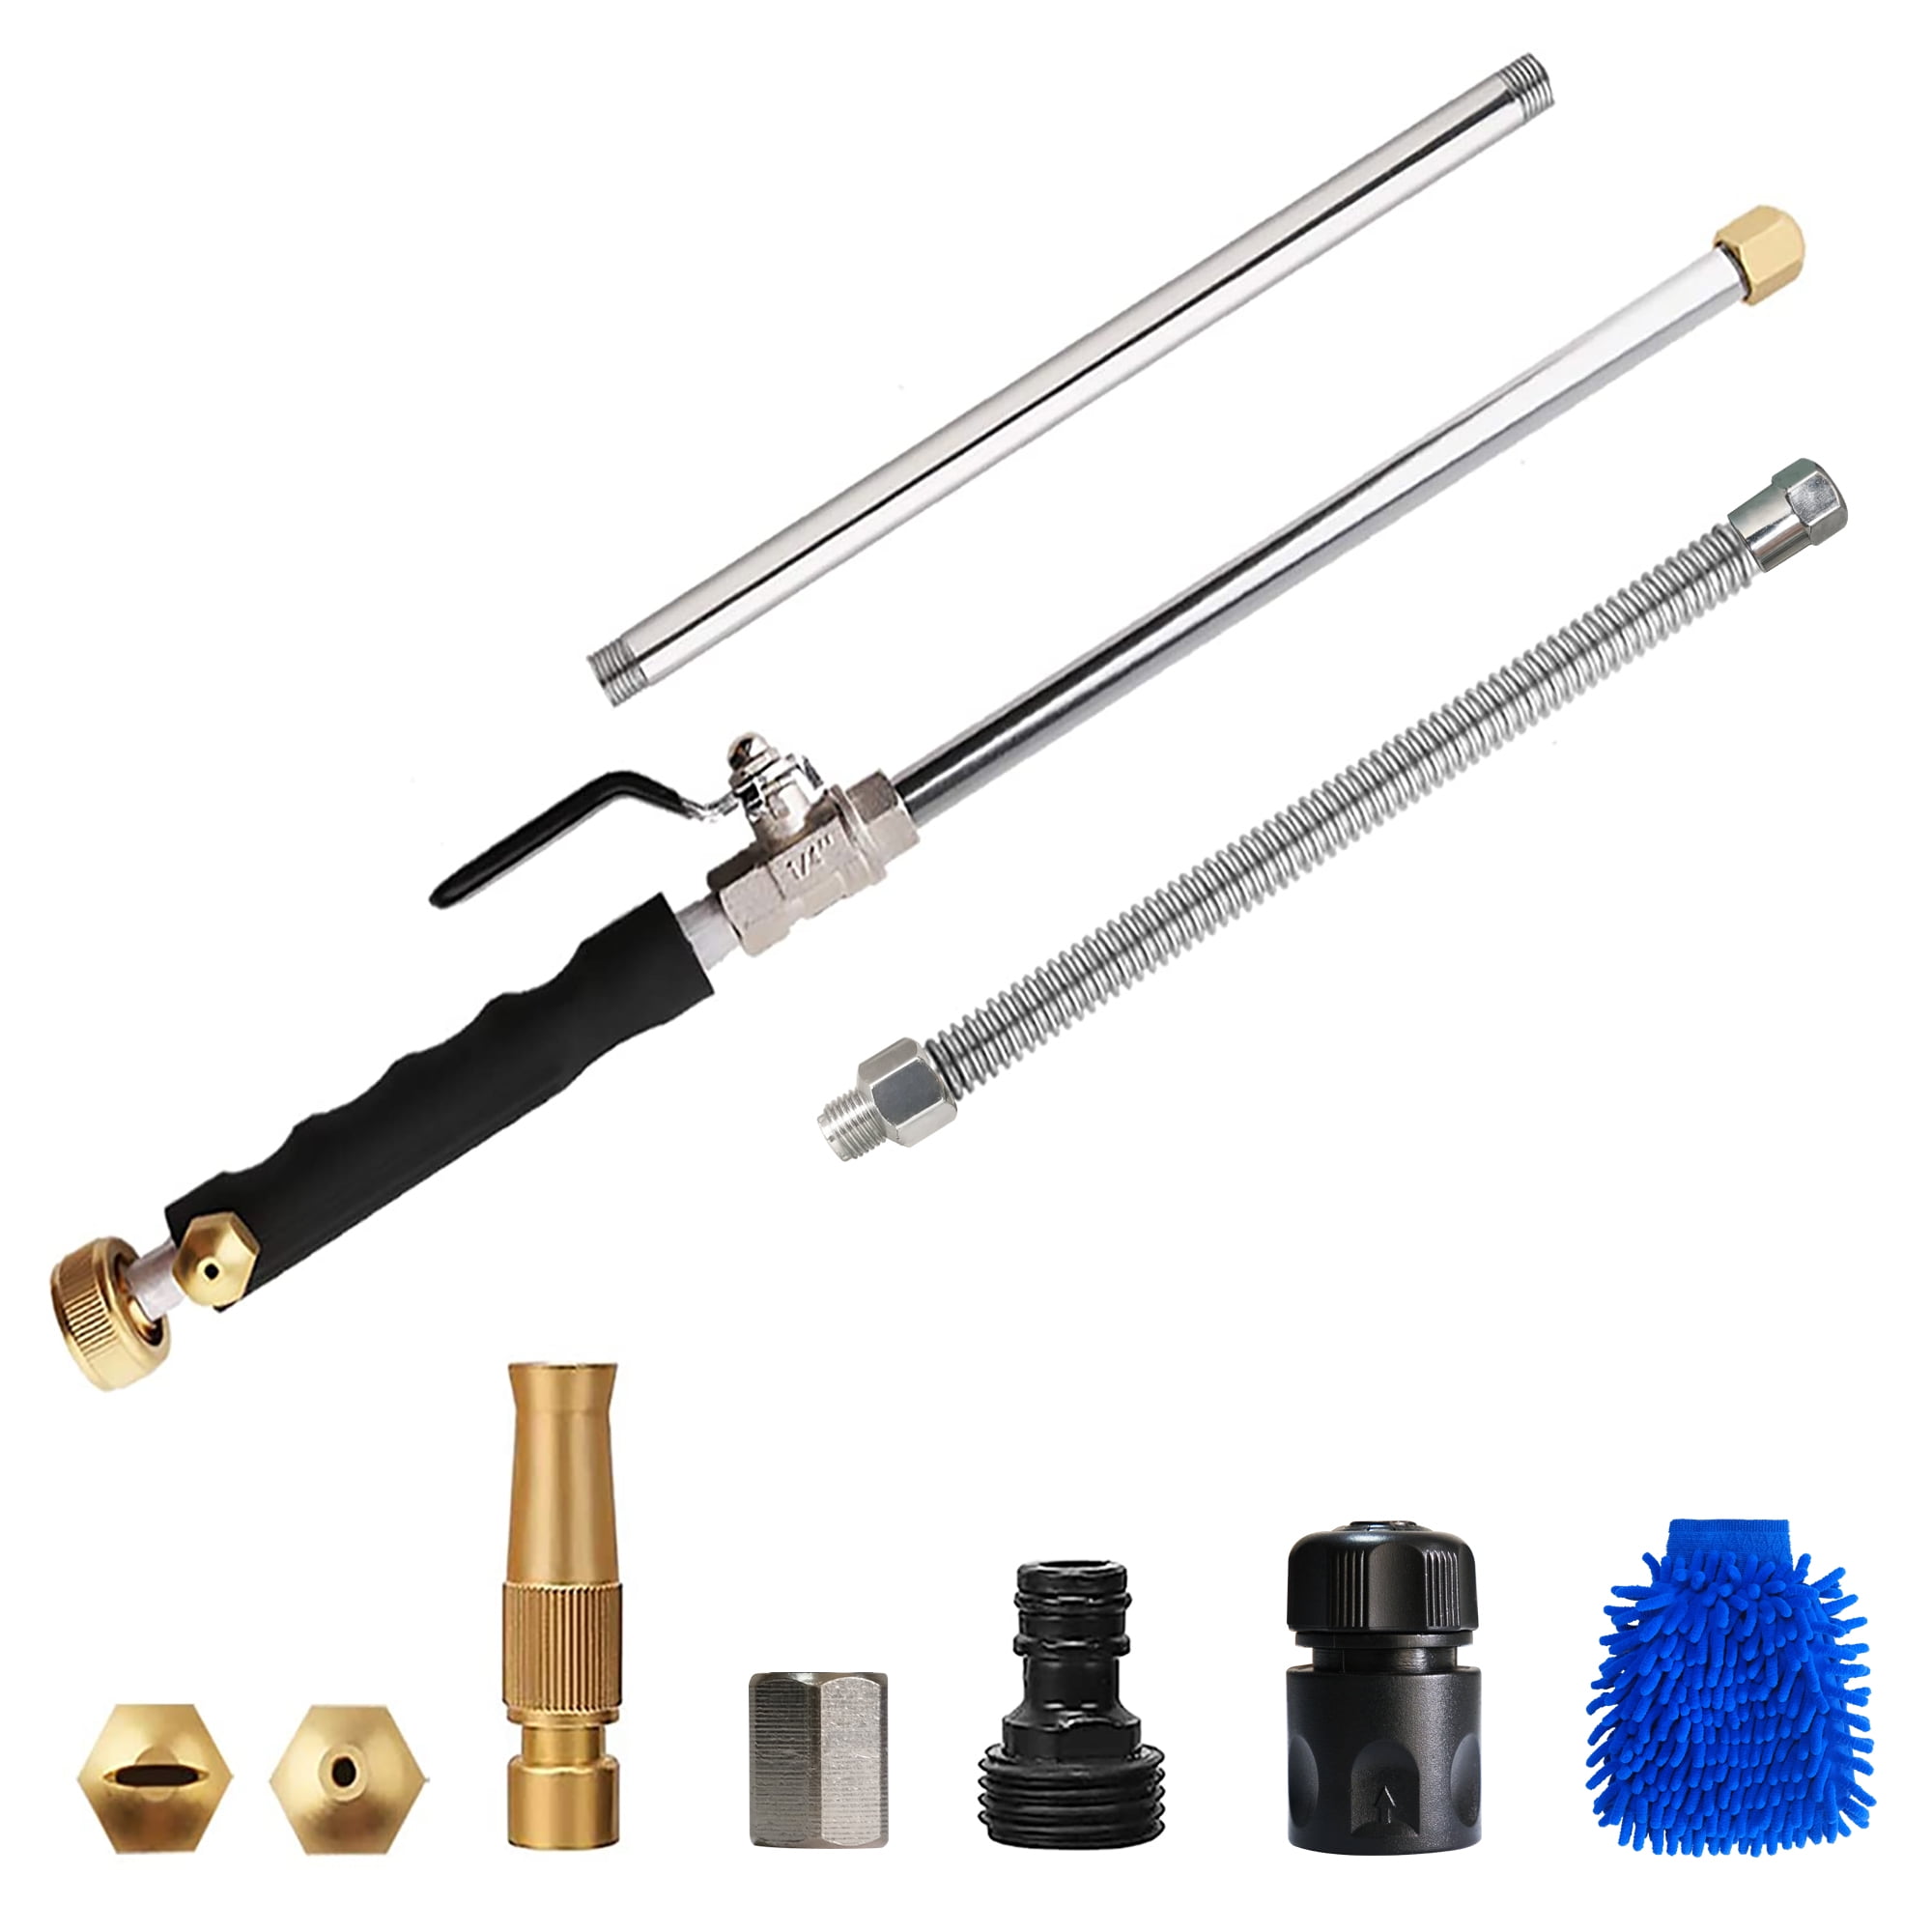 2-In-1 Hydro Jet High Pressure Power Washer Spray Nozzle Gun Water Hose Wand US